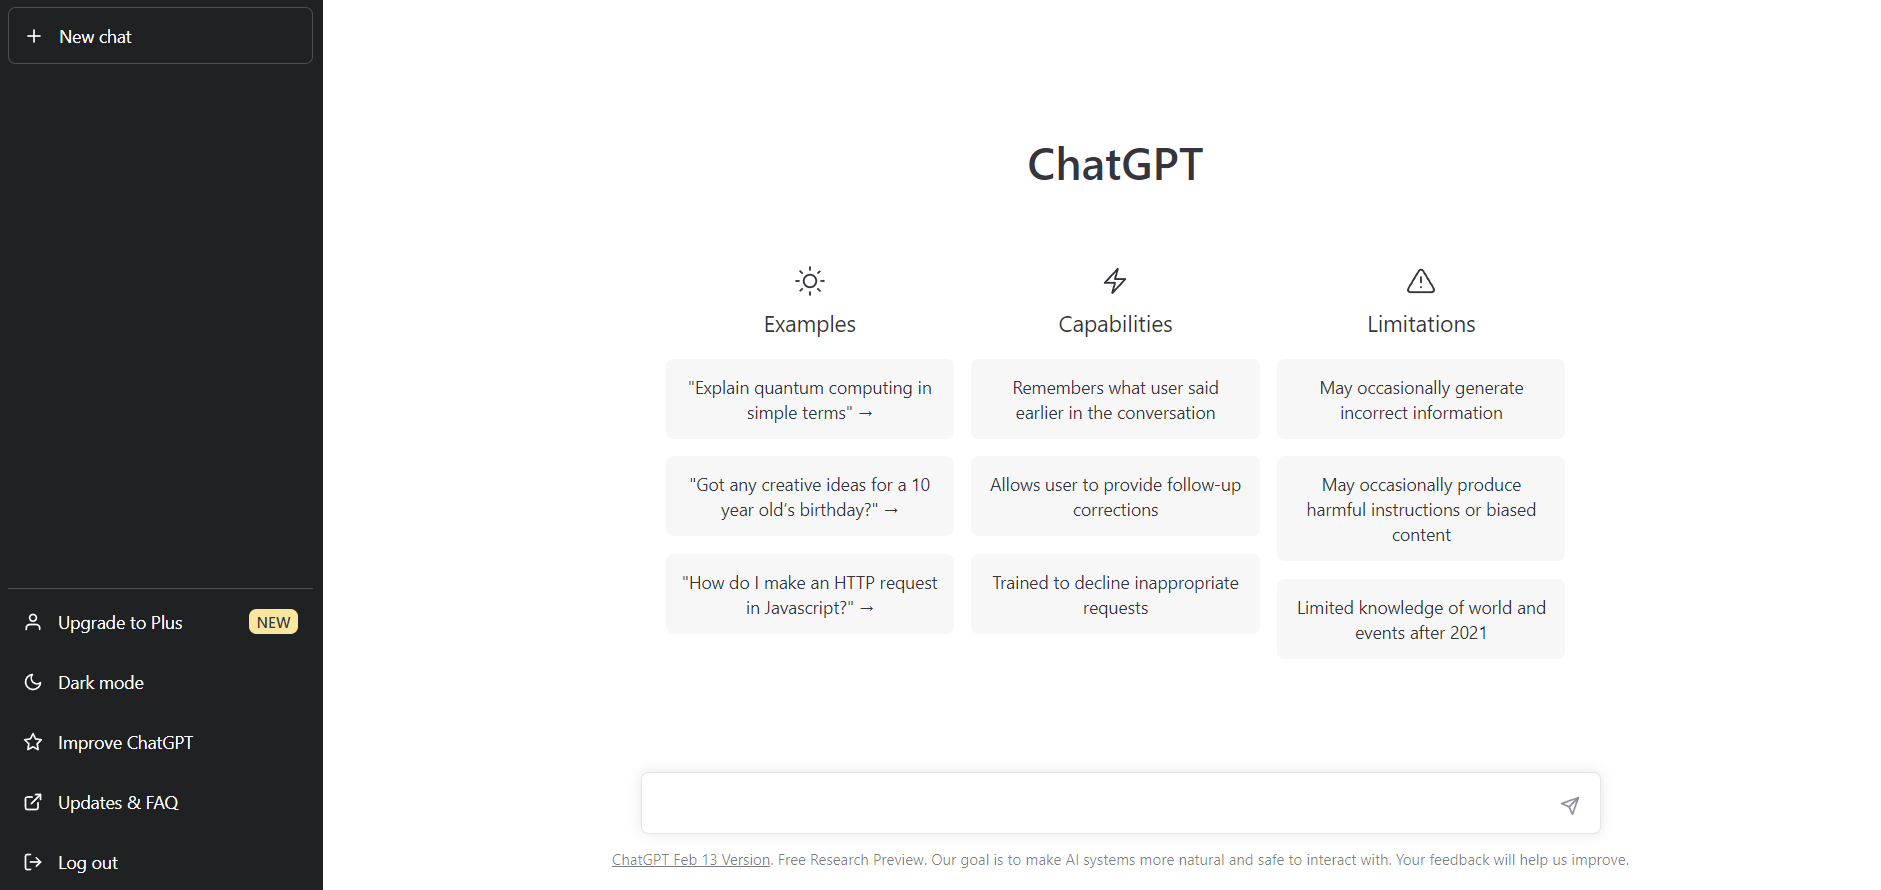 How do you get started using a ChatGPT?